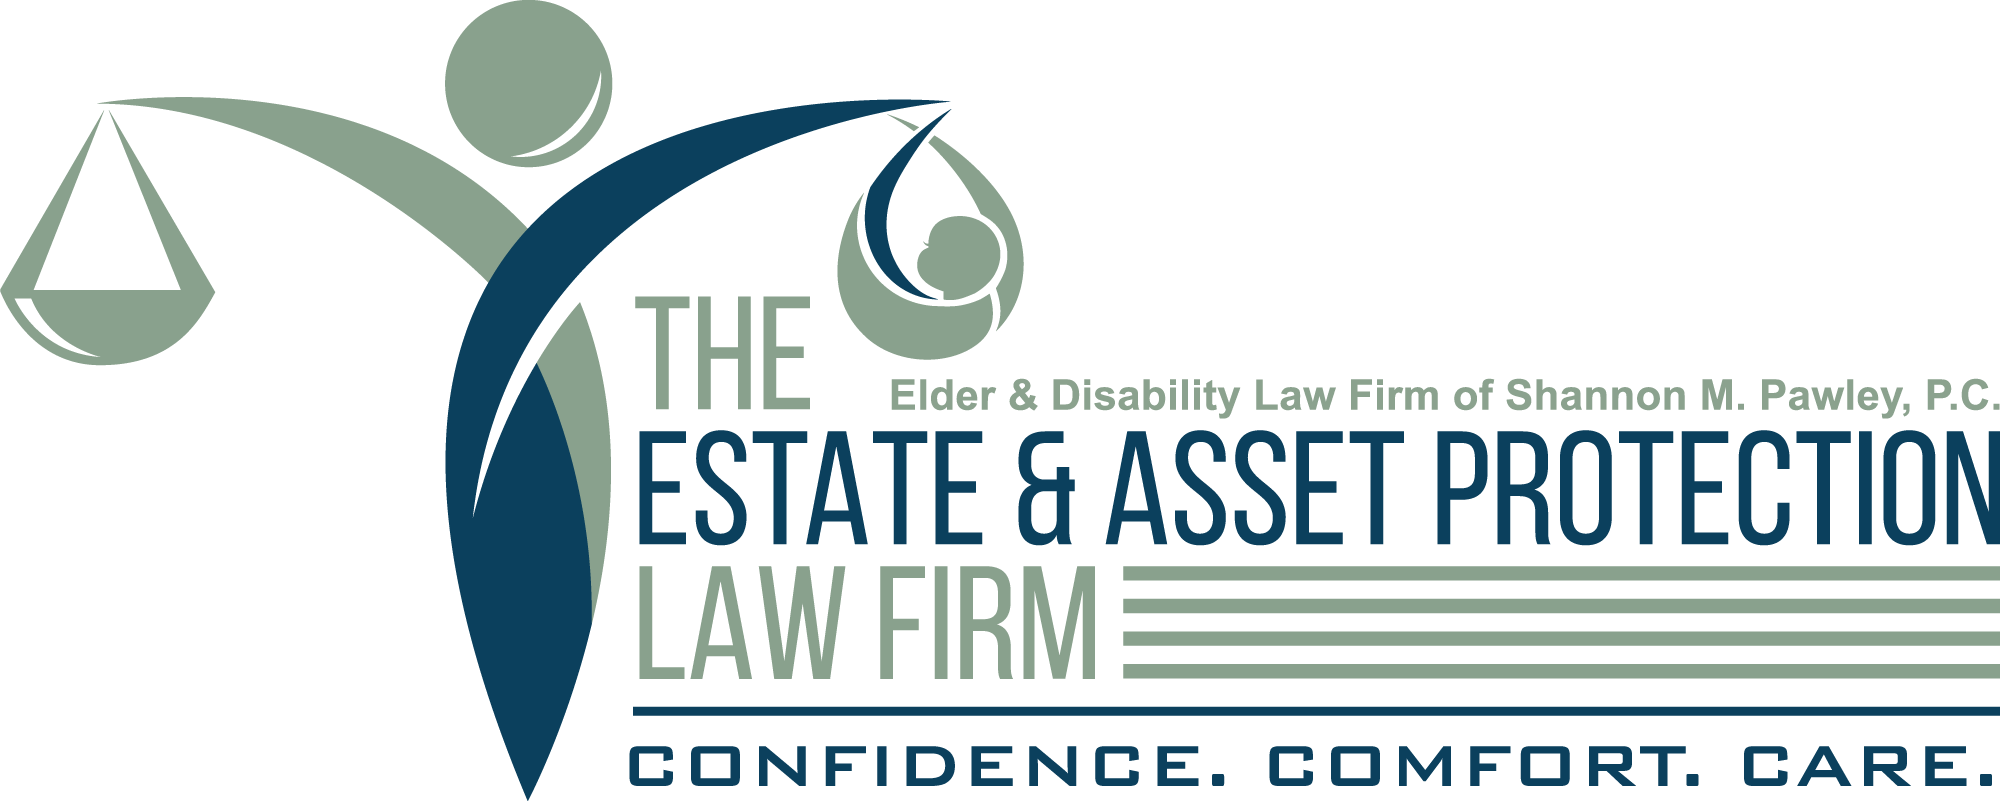 Image of in between time Happy New Year estate planning dying with dignity asset protection  on estate management asset protection law site